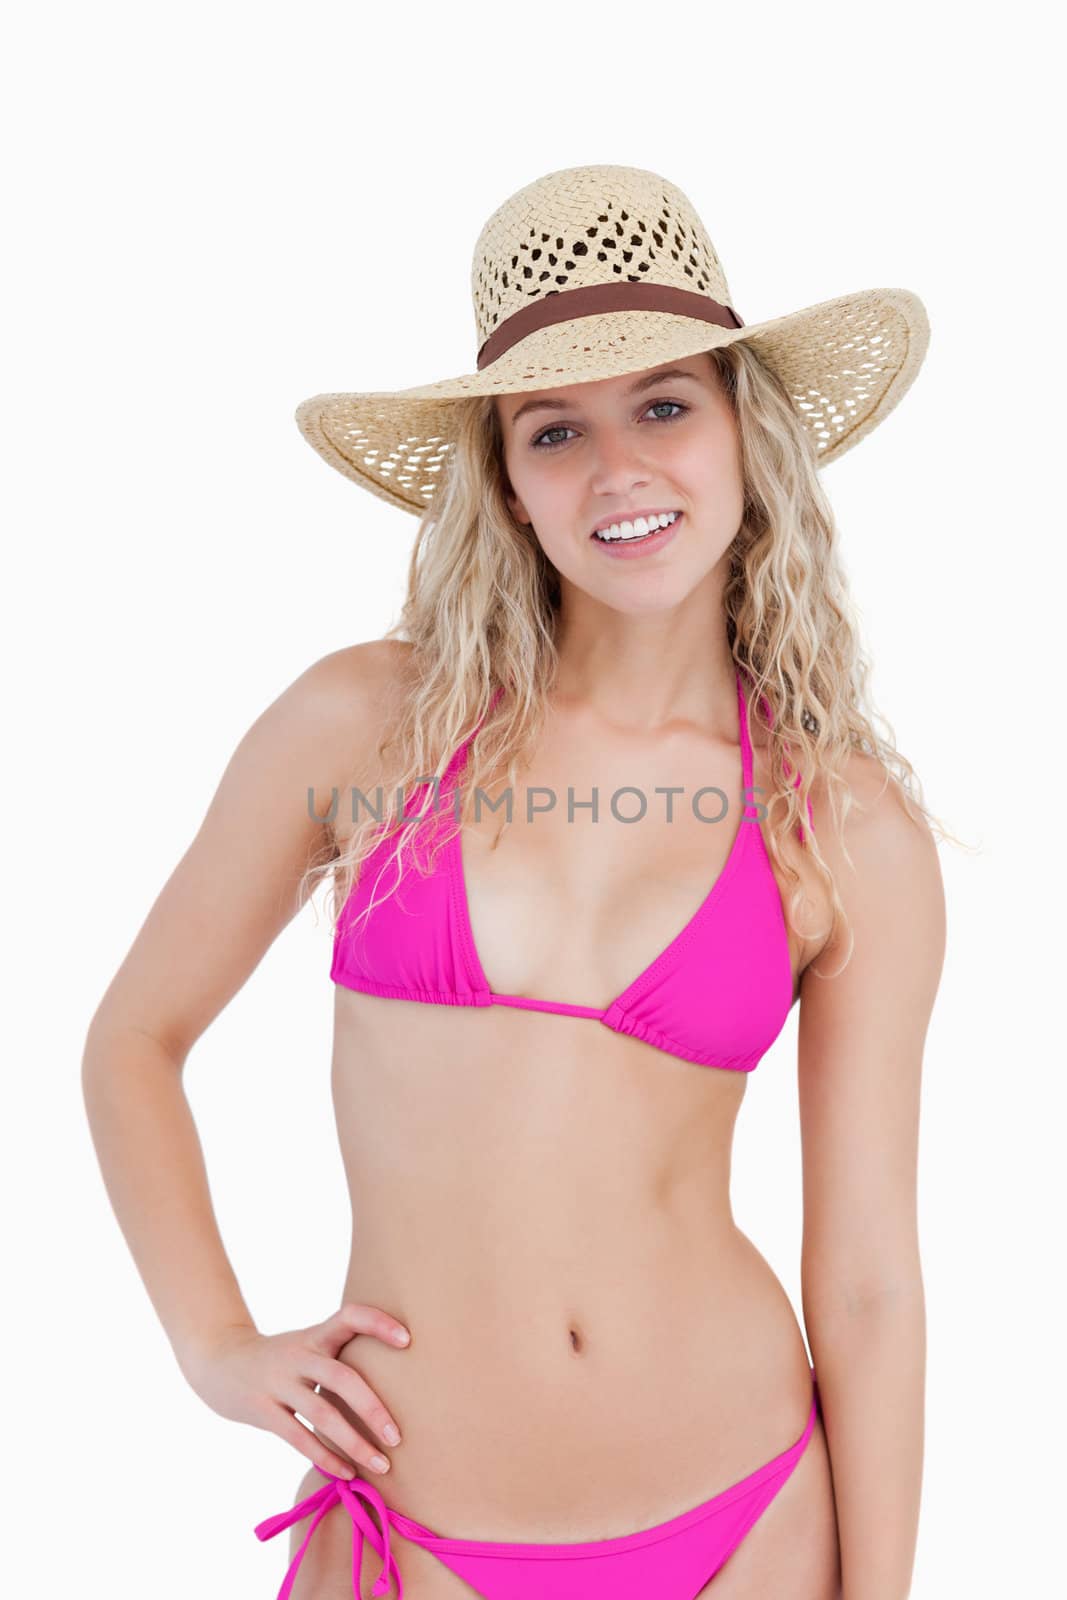 Attractive blonde teenager placing a hand on her hip against a white background